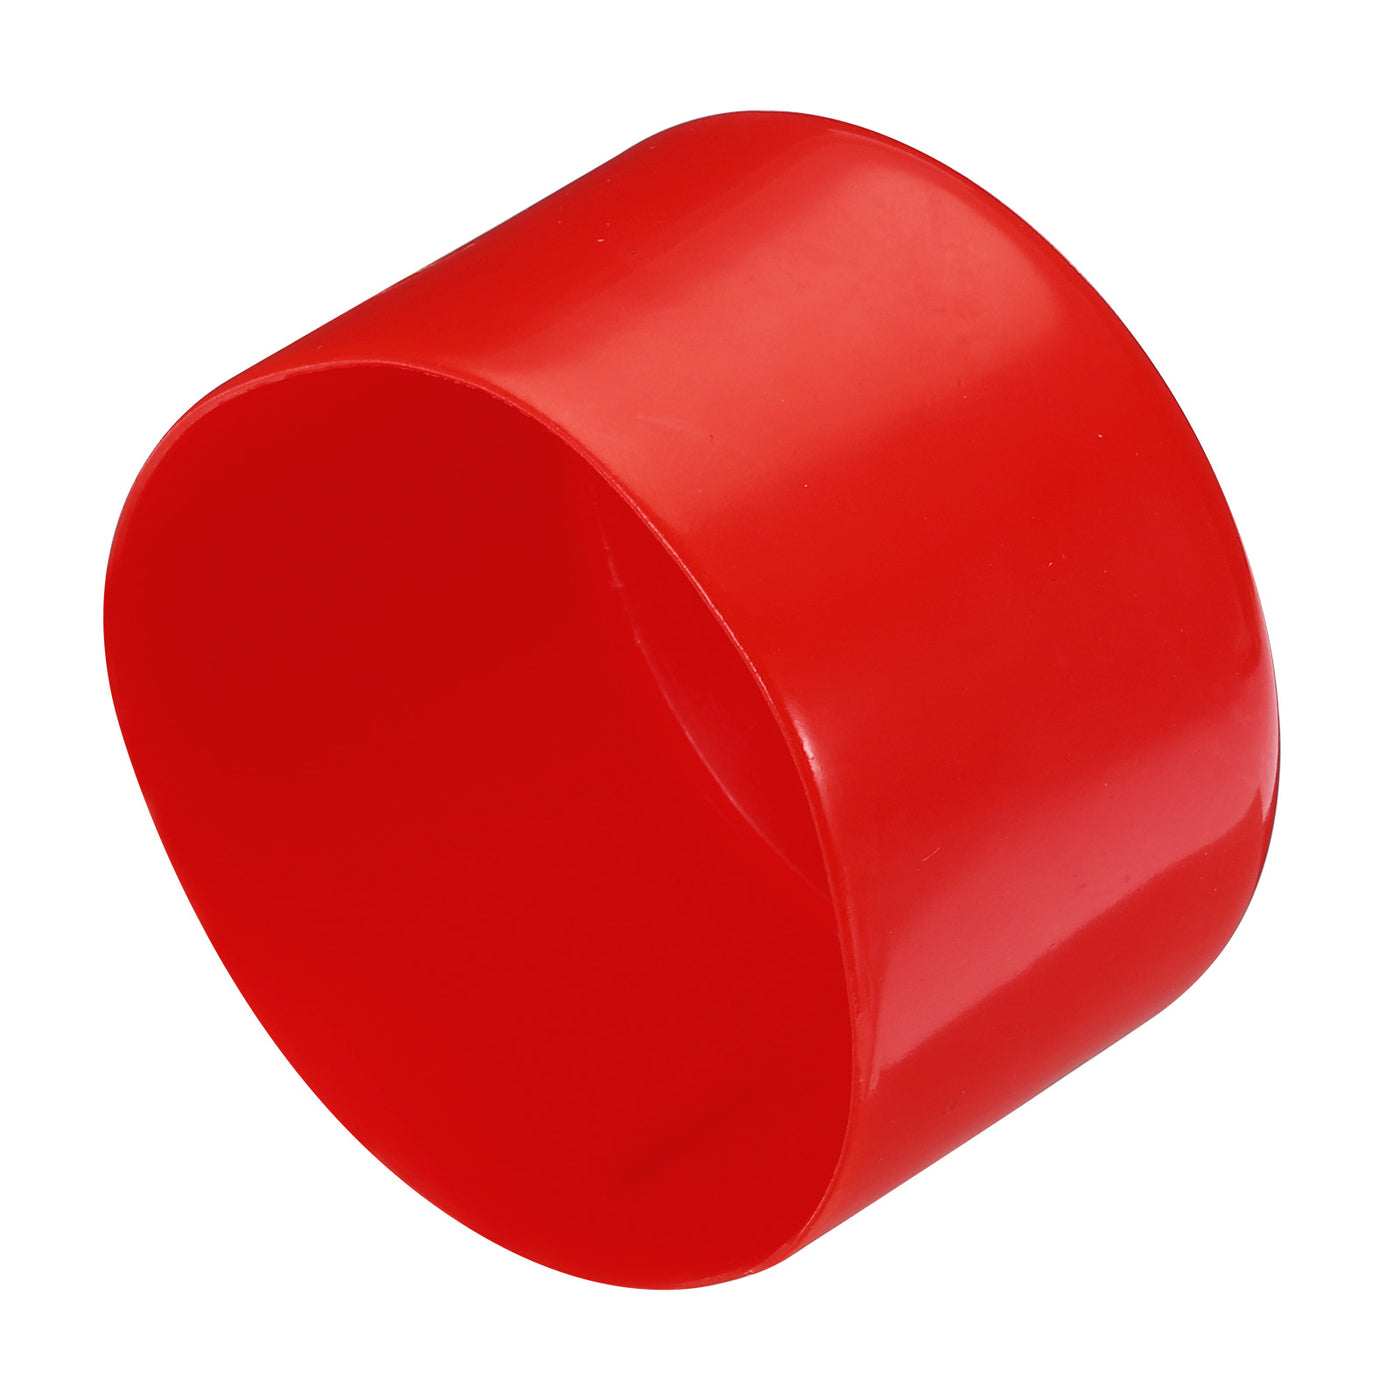 uxcell Uxcell 4pcs Rubber End Caps 80mm ID Vinyl Round Tube Bolt Cap Cover Screw Thread Protectors Red